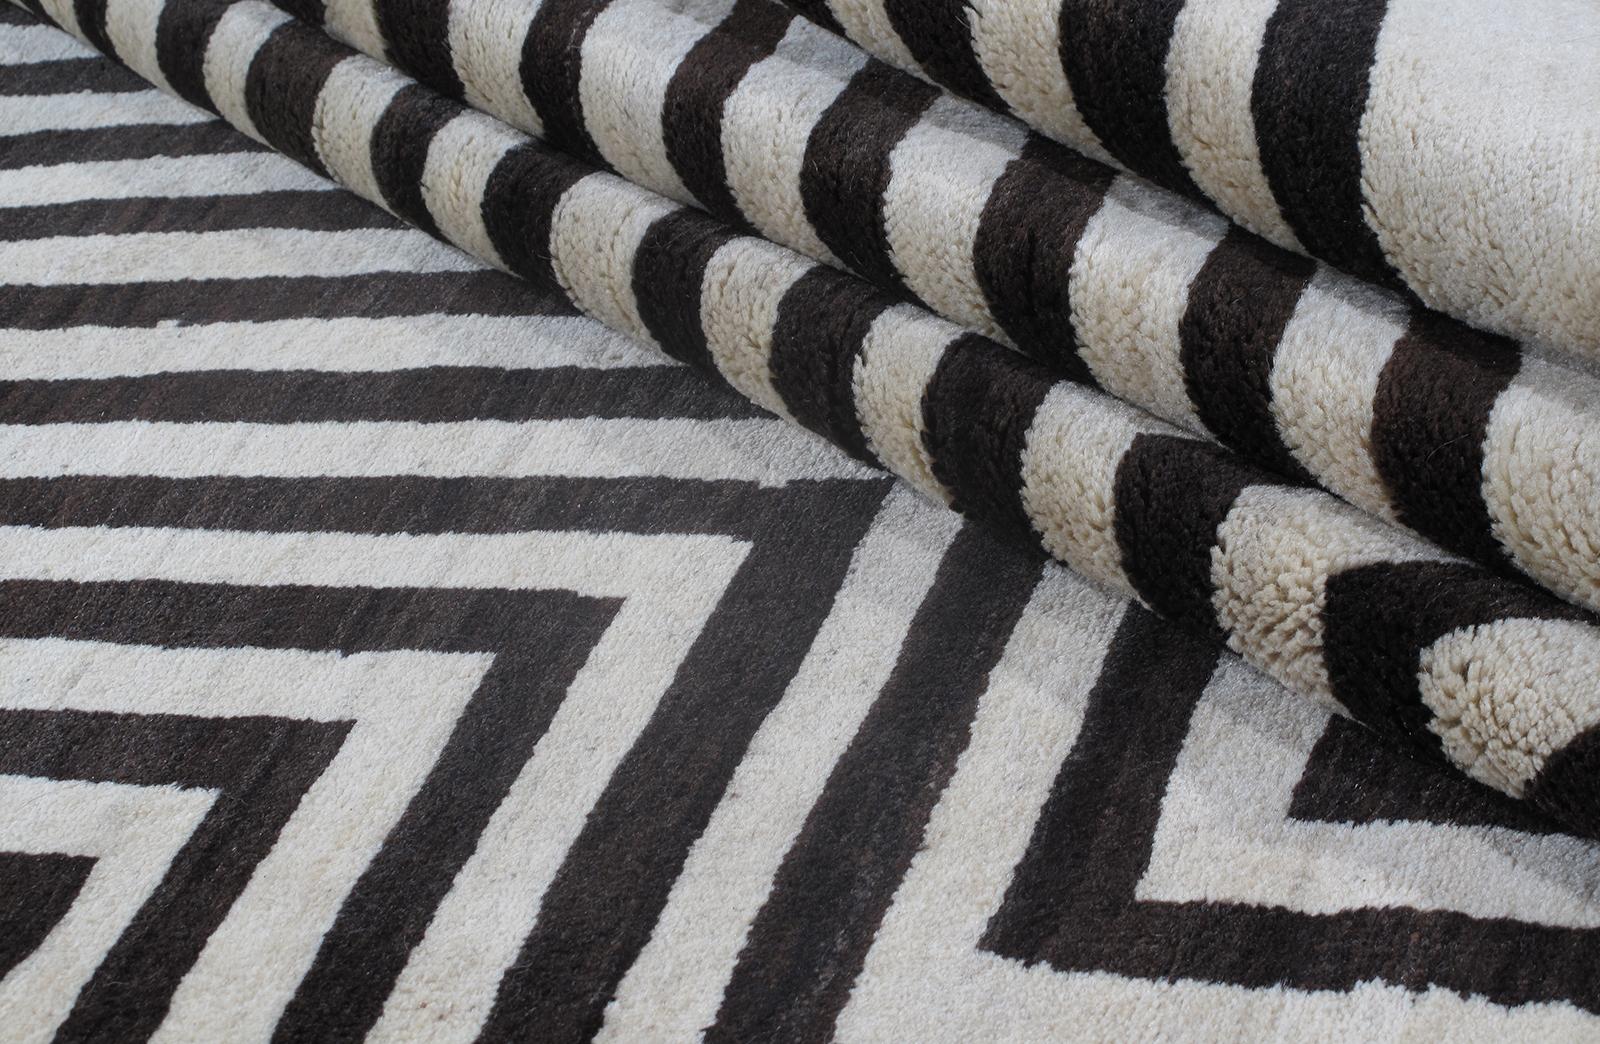 This Persian Shiraz bold graphic black and ivory pattern rug is hand-knotted, and made from the finest hand-spun, hand-carded naturally dyed wool. Many of the rugs made in the villages surrounding the city of Shiraz, in the province of Fars are